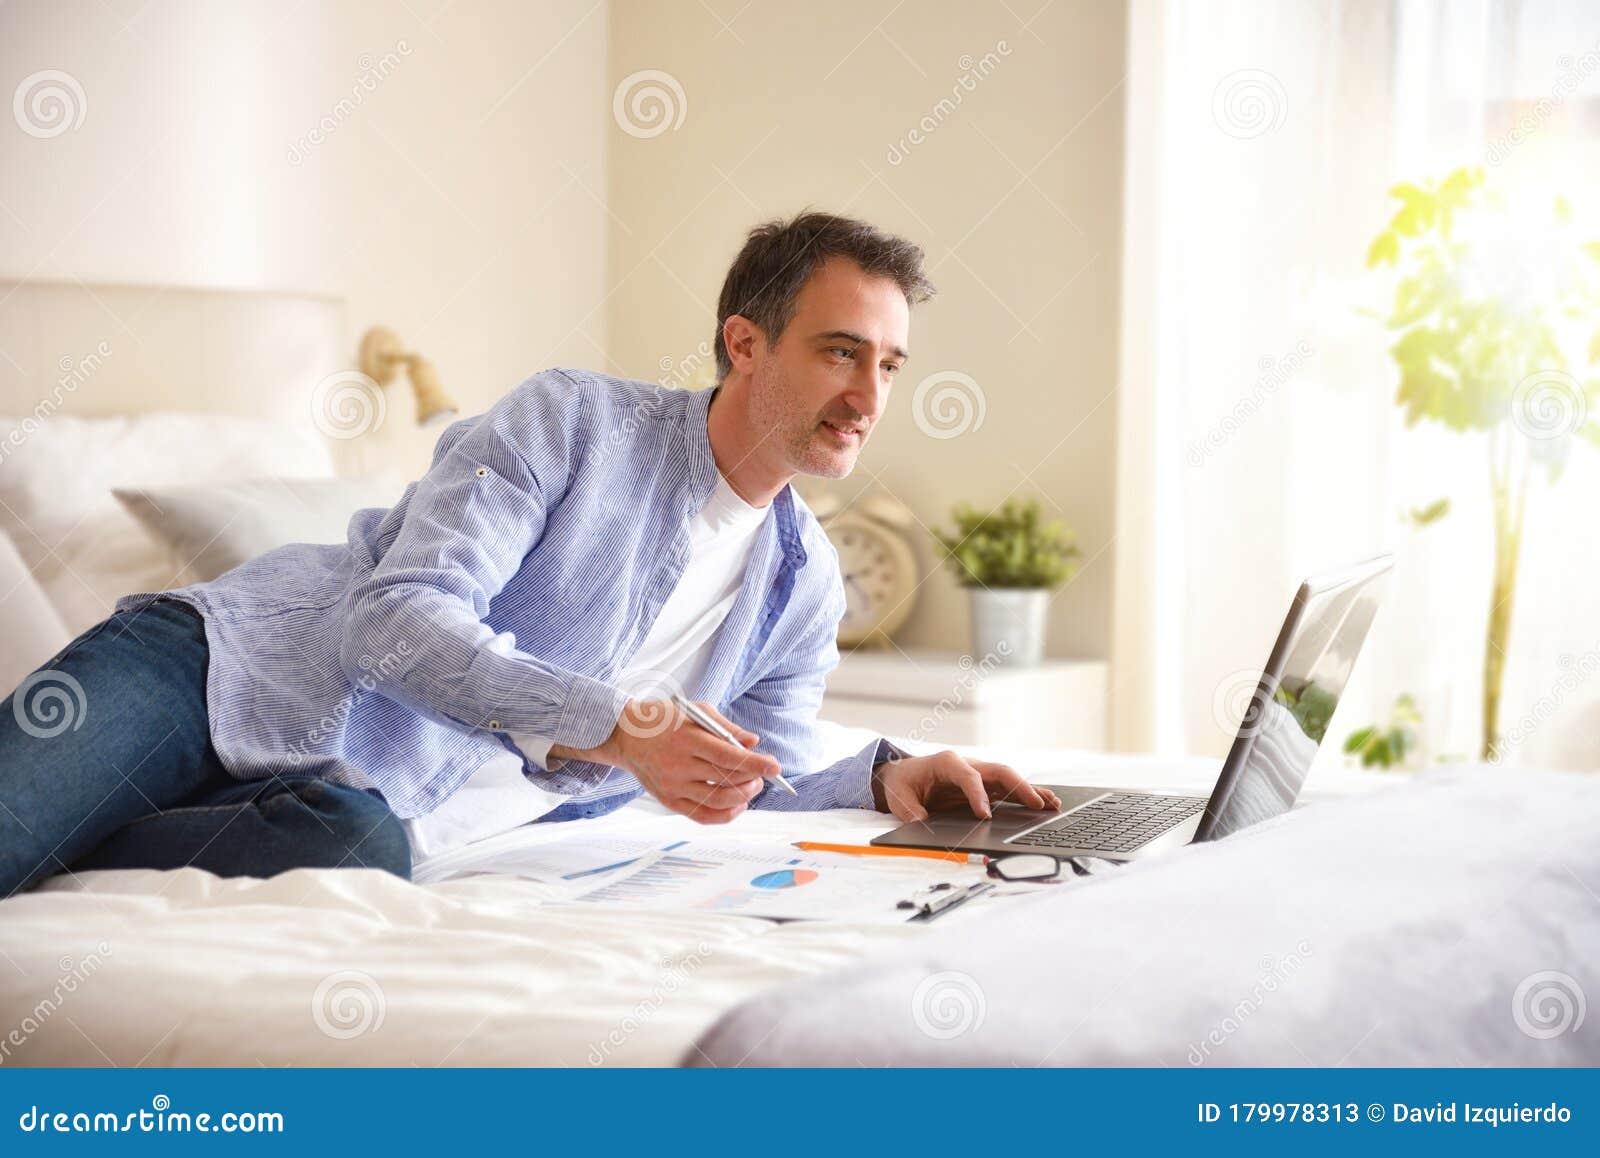 businessman working with a laptop smiling lying on a bed